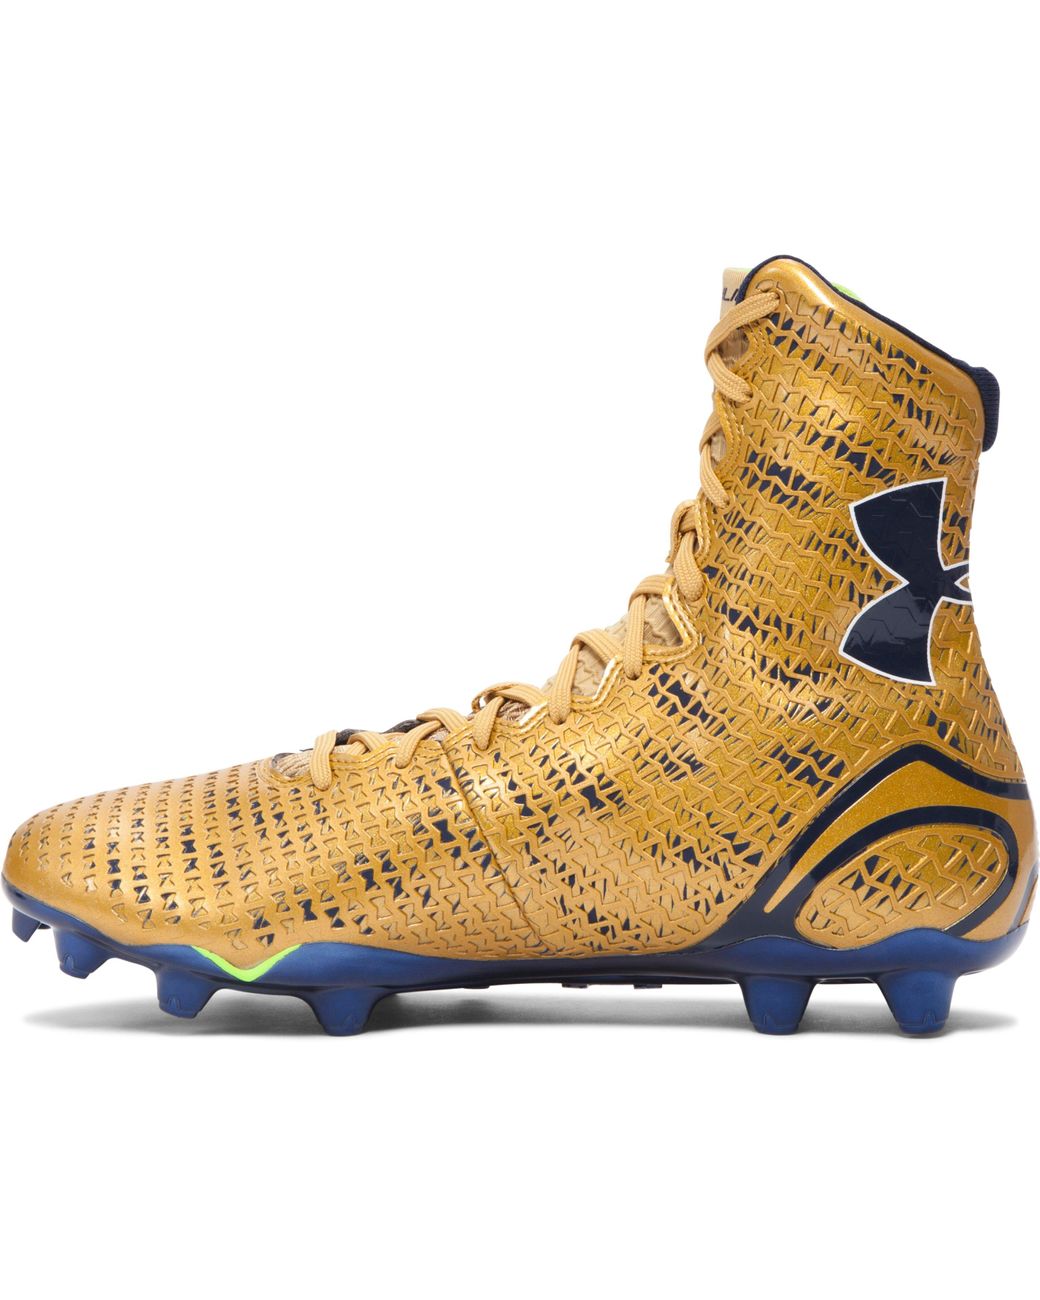 Under Armour Men's Ua Highlight Football Cleats — Limited Edition in  Metallic Gold/Metallic Gold (Metallic) for Men | Lyst